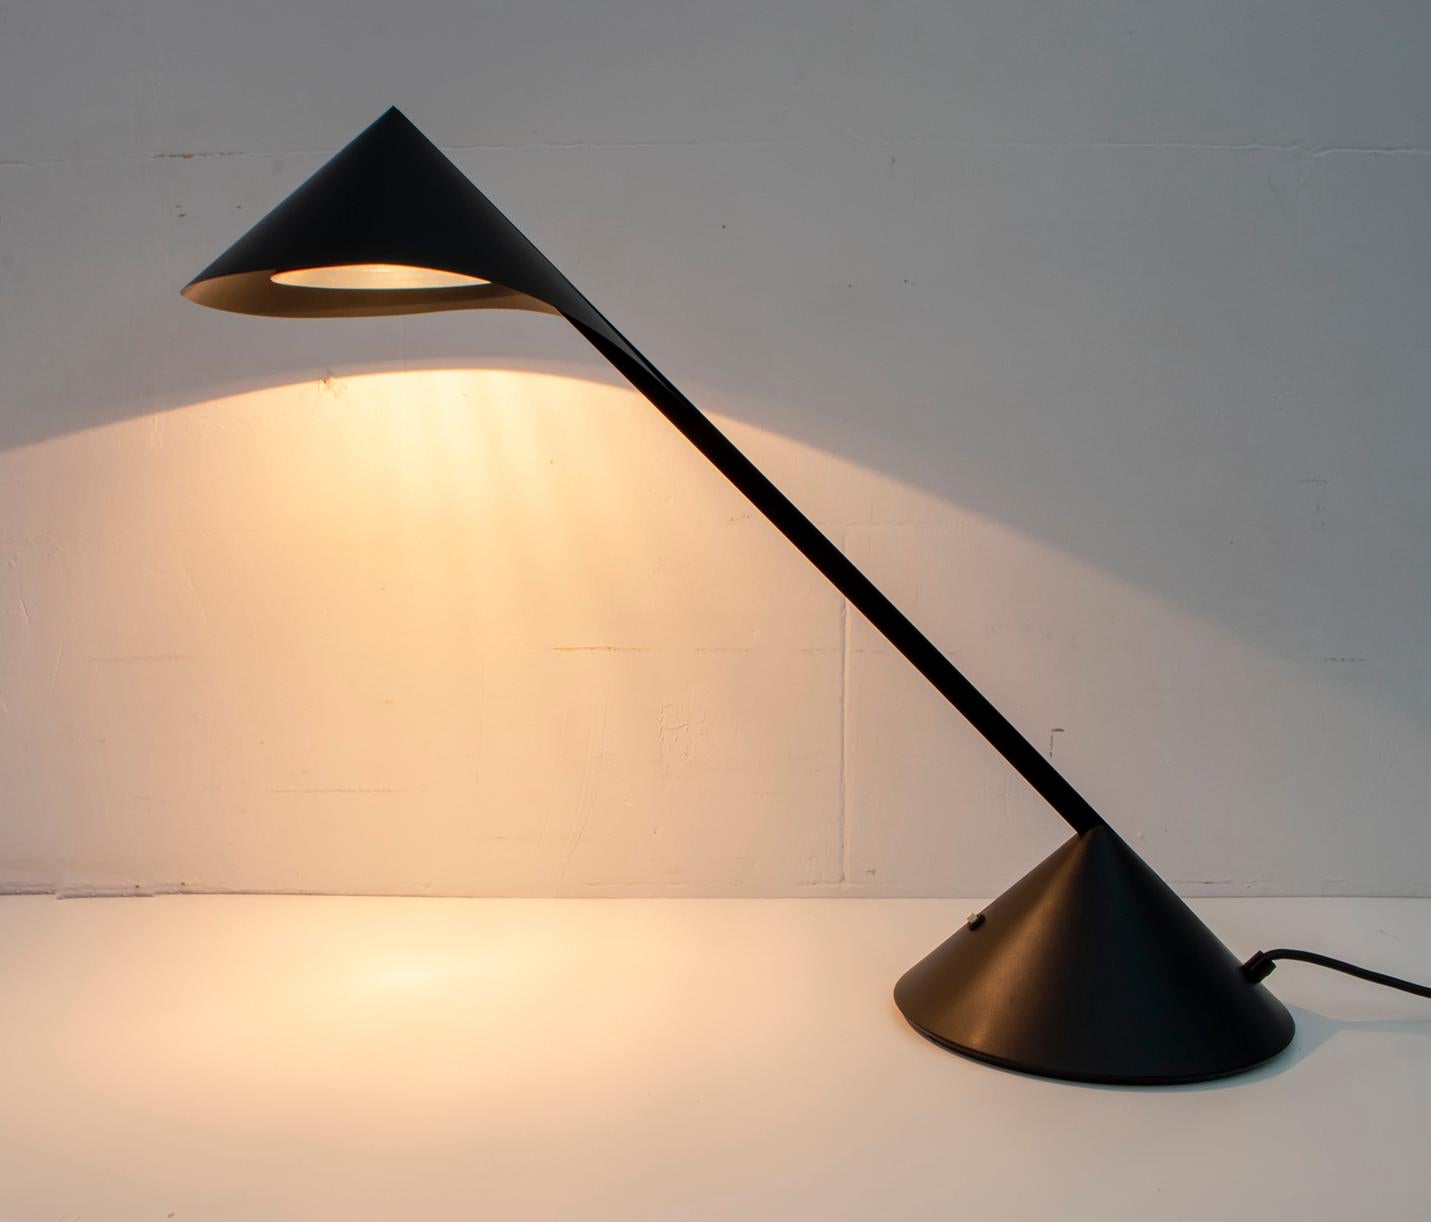 Alobella table lamp designed by Giovanni Pasotto for Valenti from the 1970s.